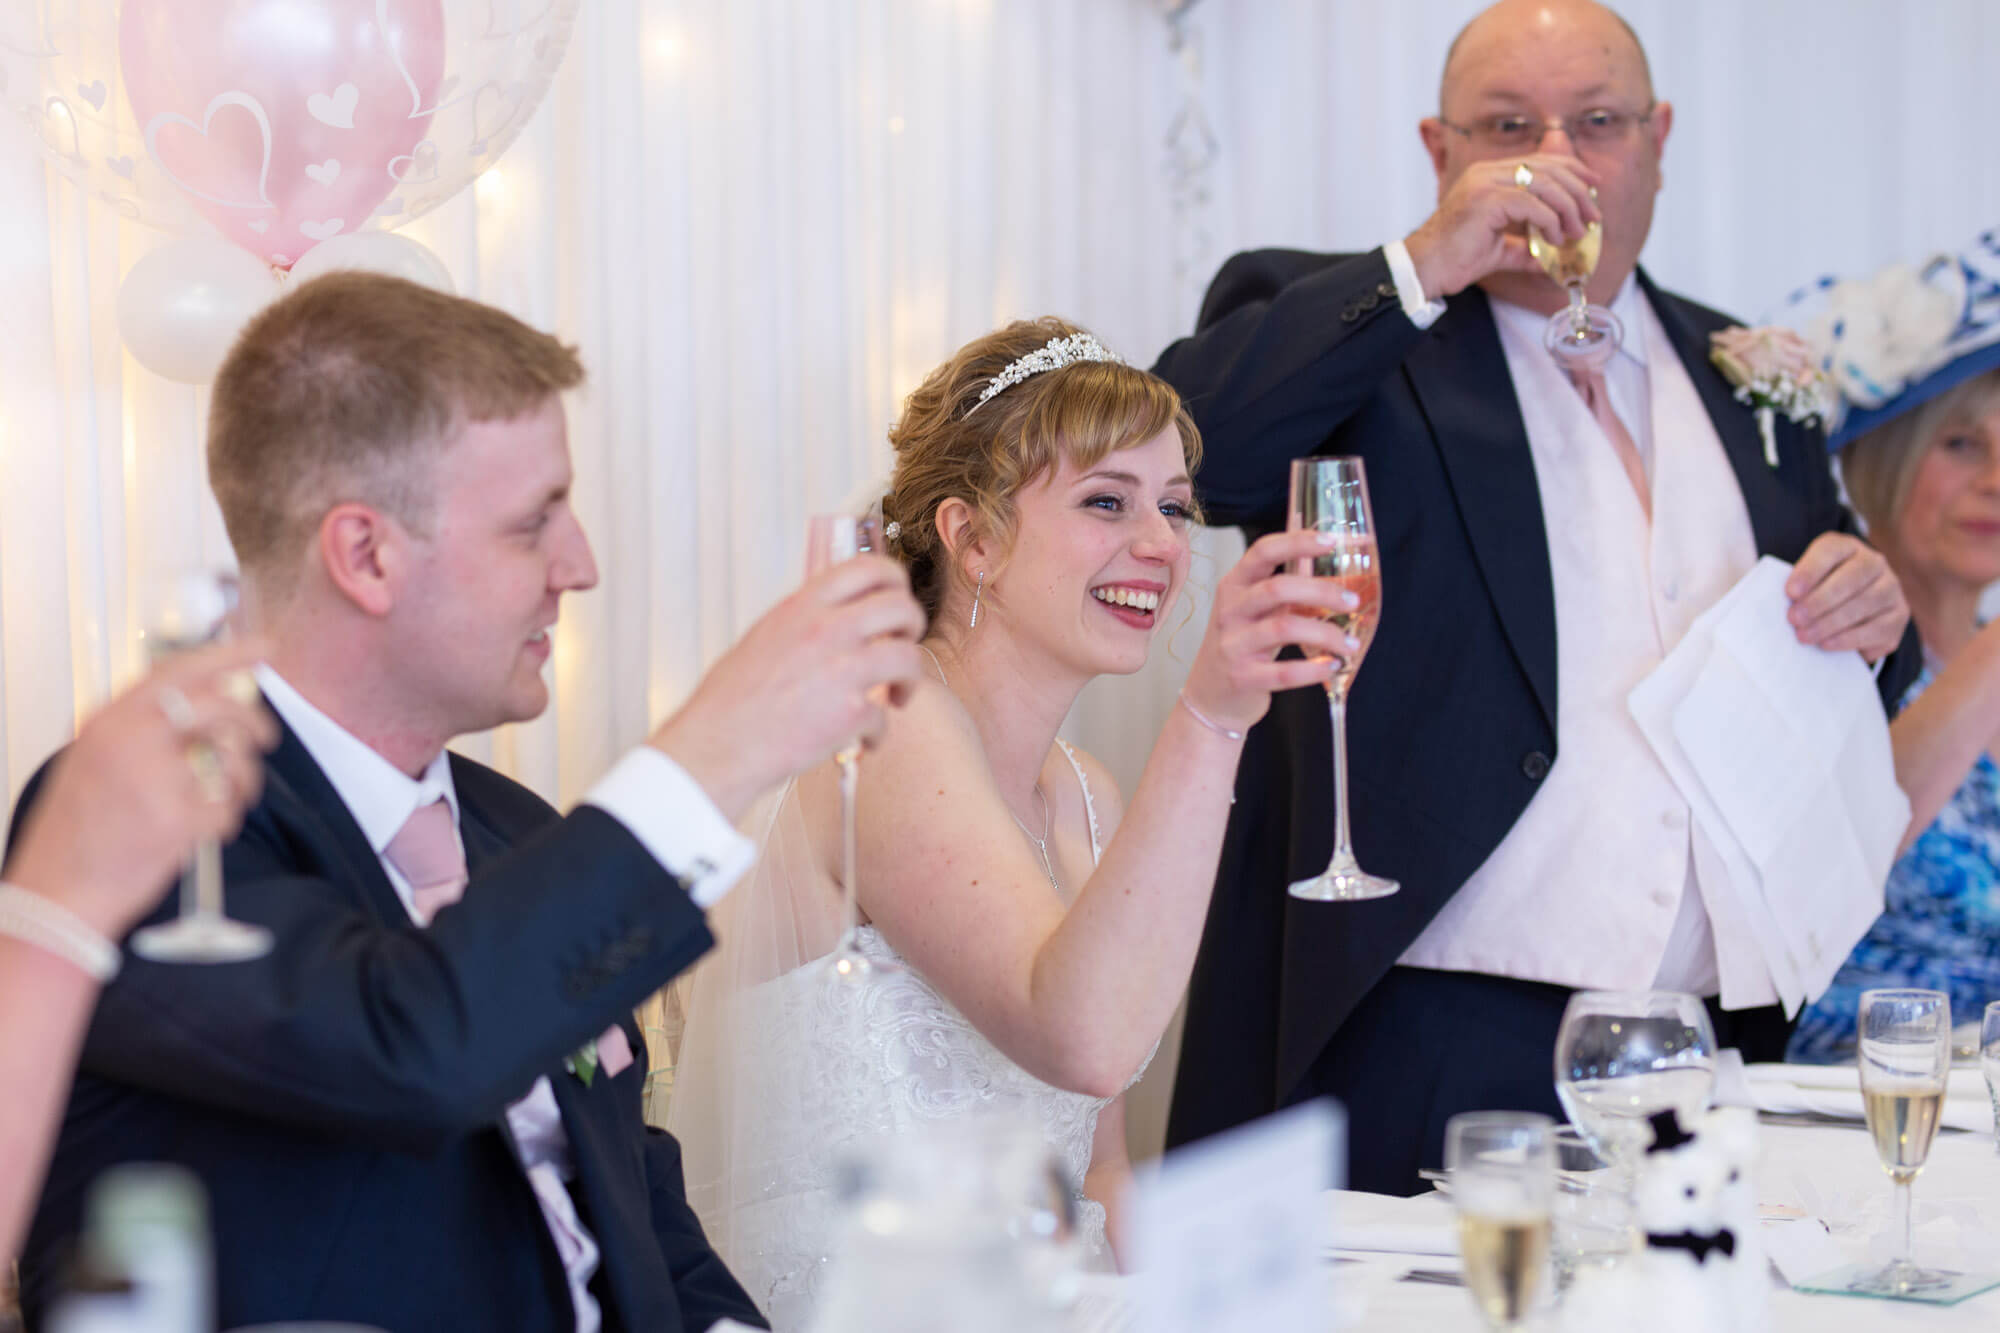 the smiling couple raise their champagne glasses to toast the bridal party during the father of the bride's speech